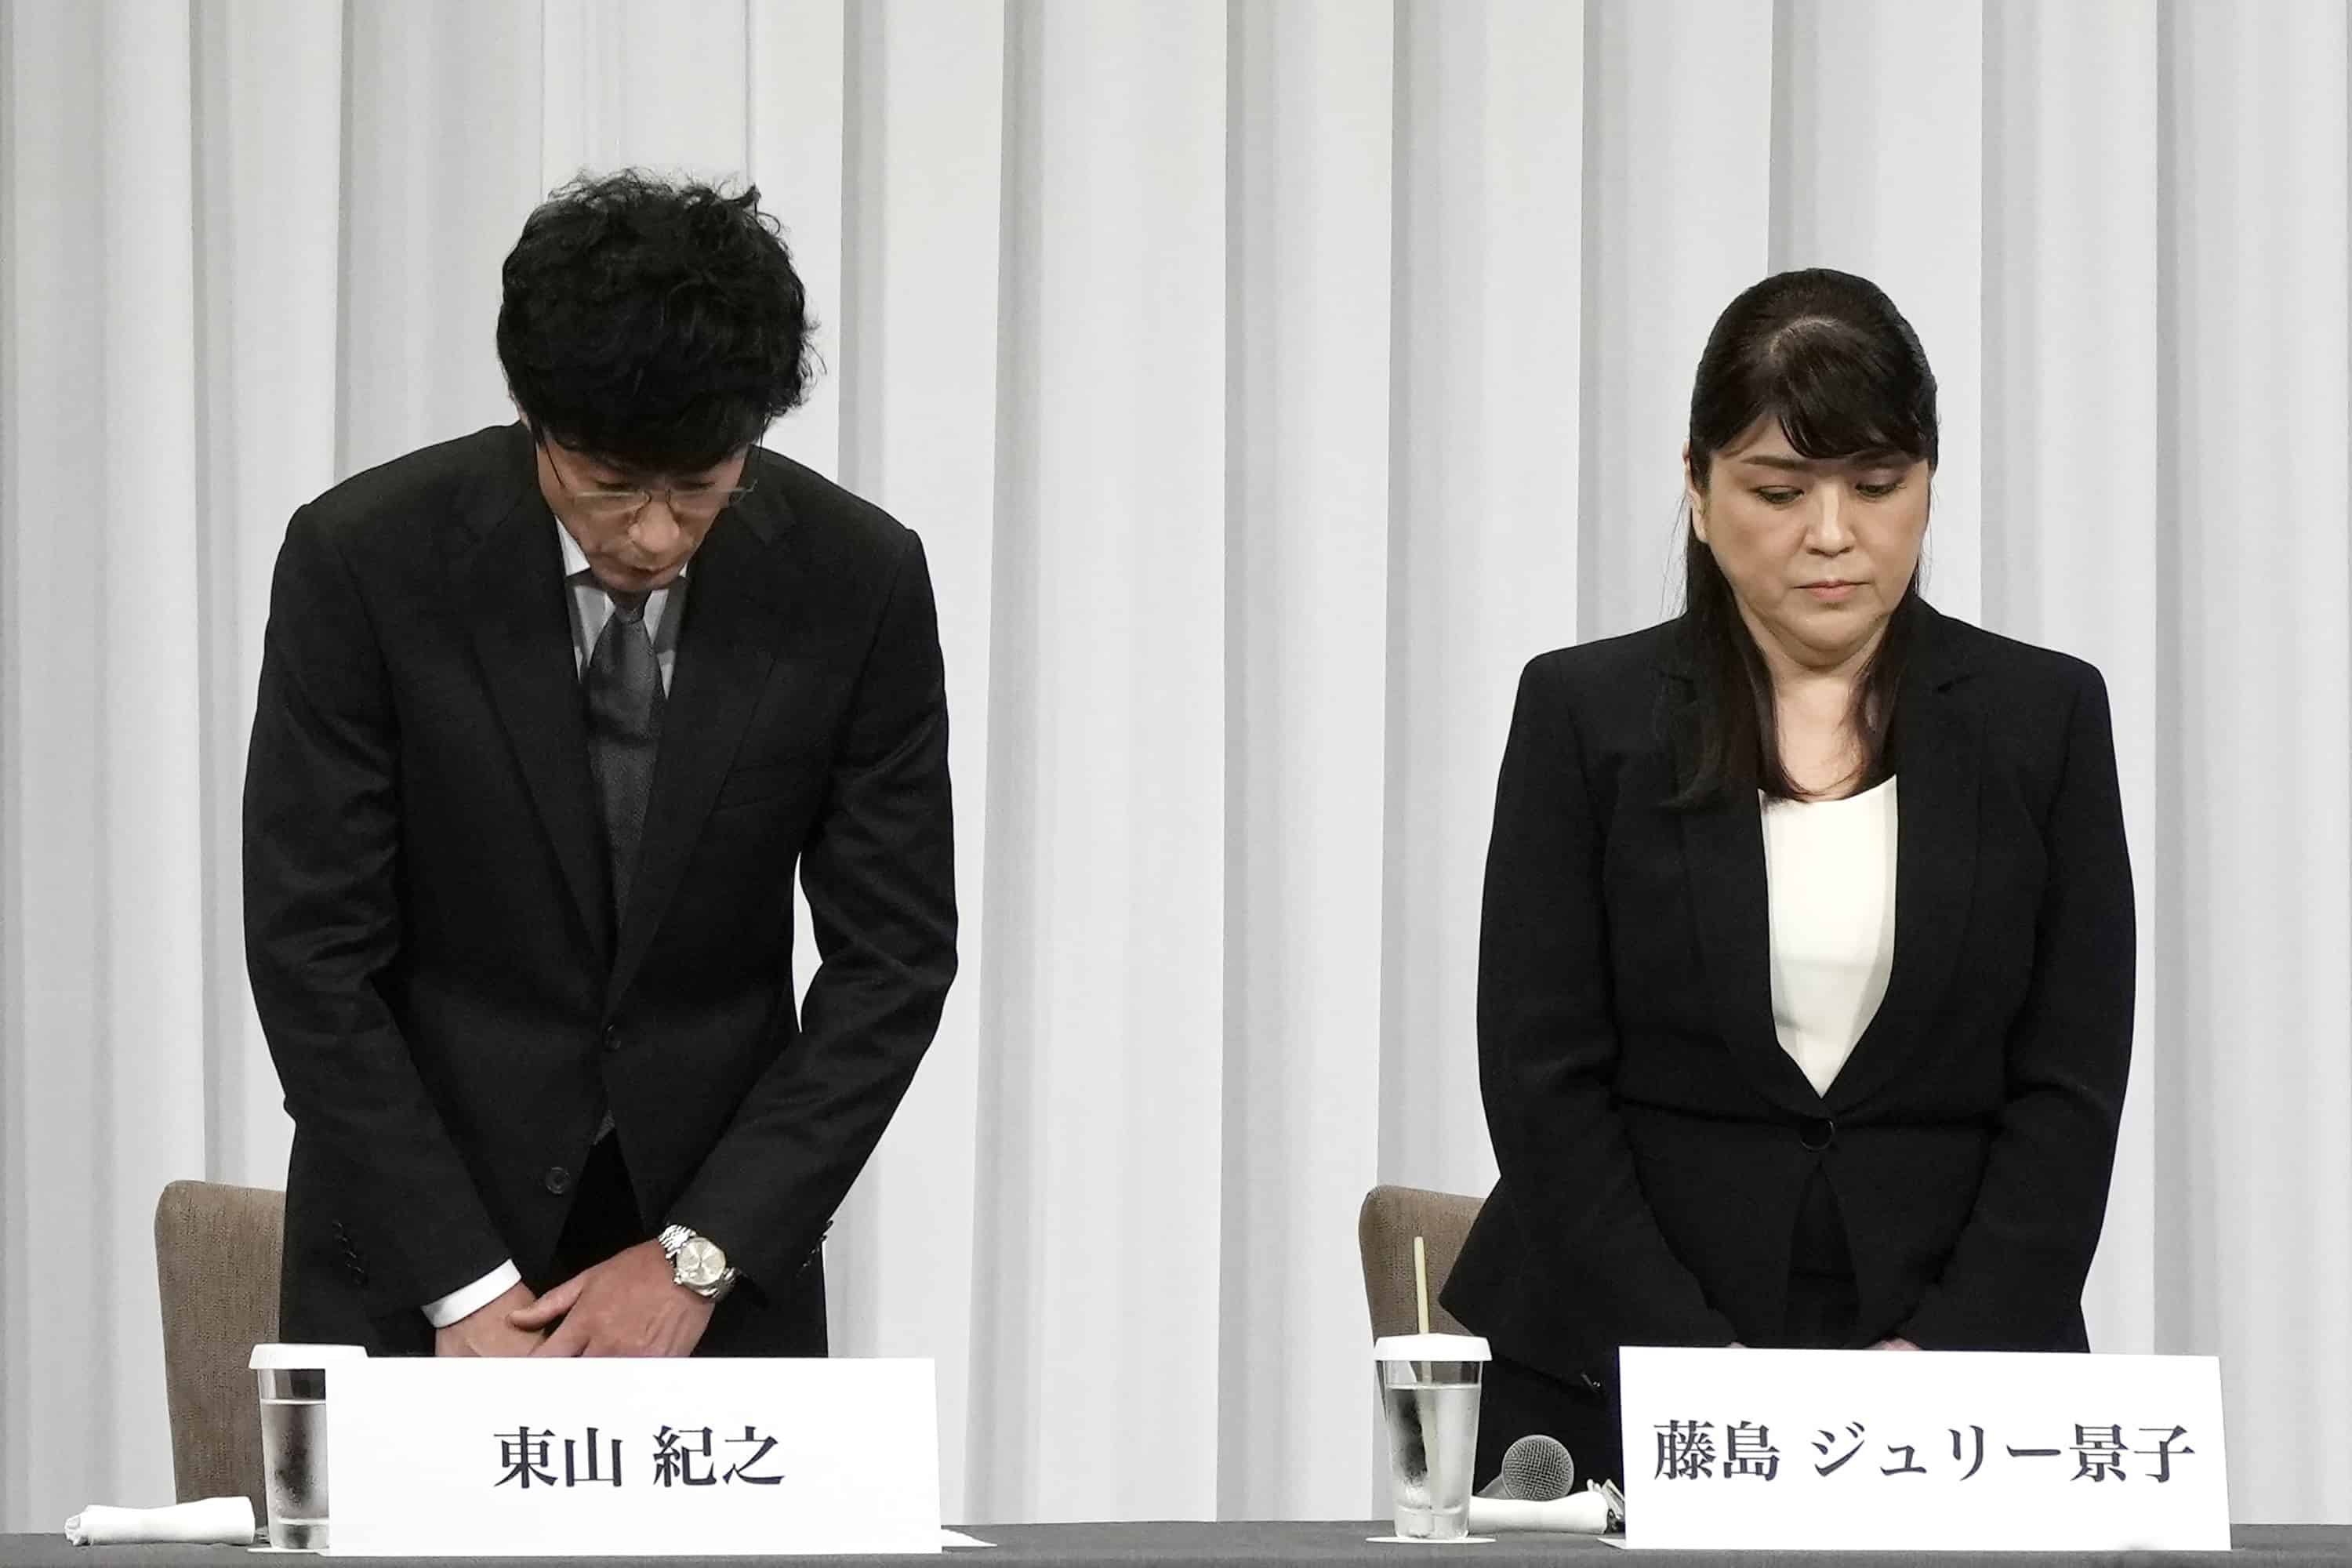 Japanese boy-band production company sets up panel to compensate sexual assault victims Courthouse News Service